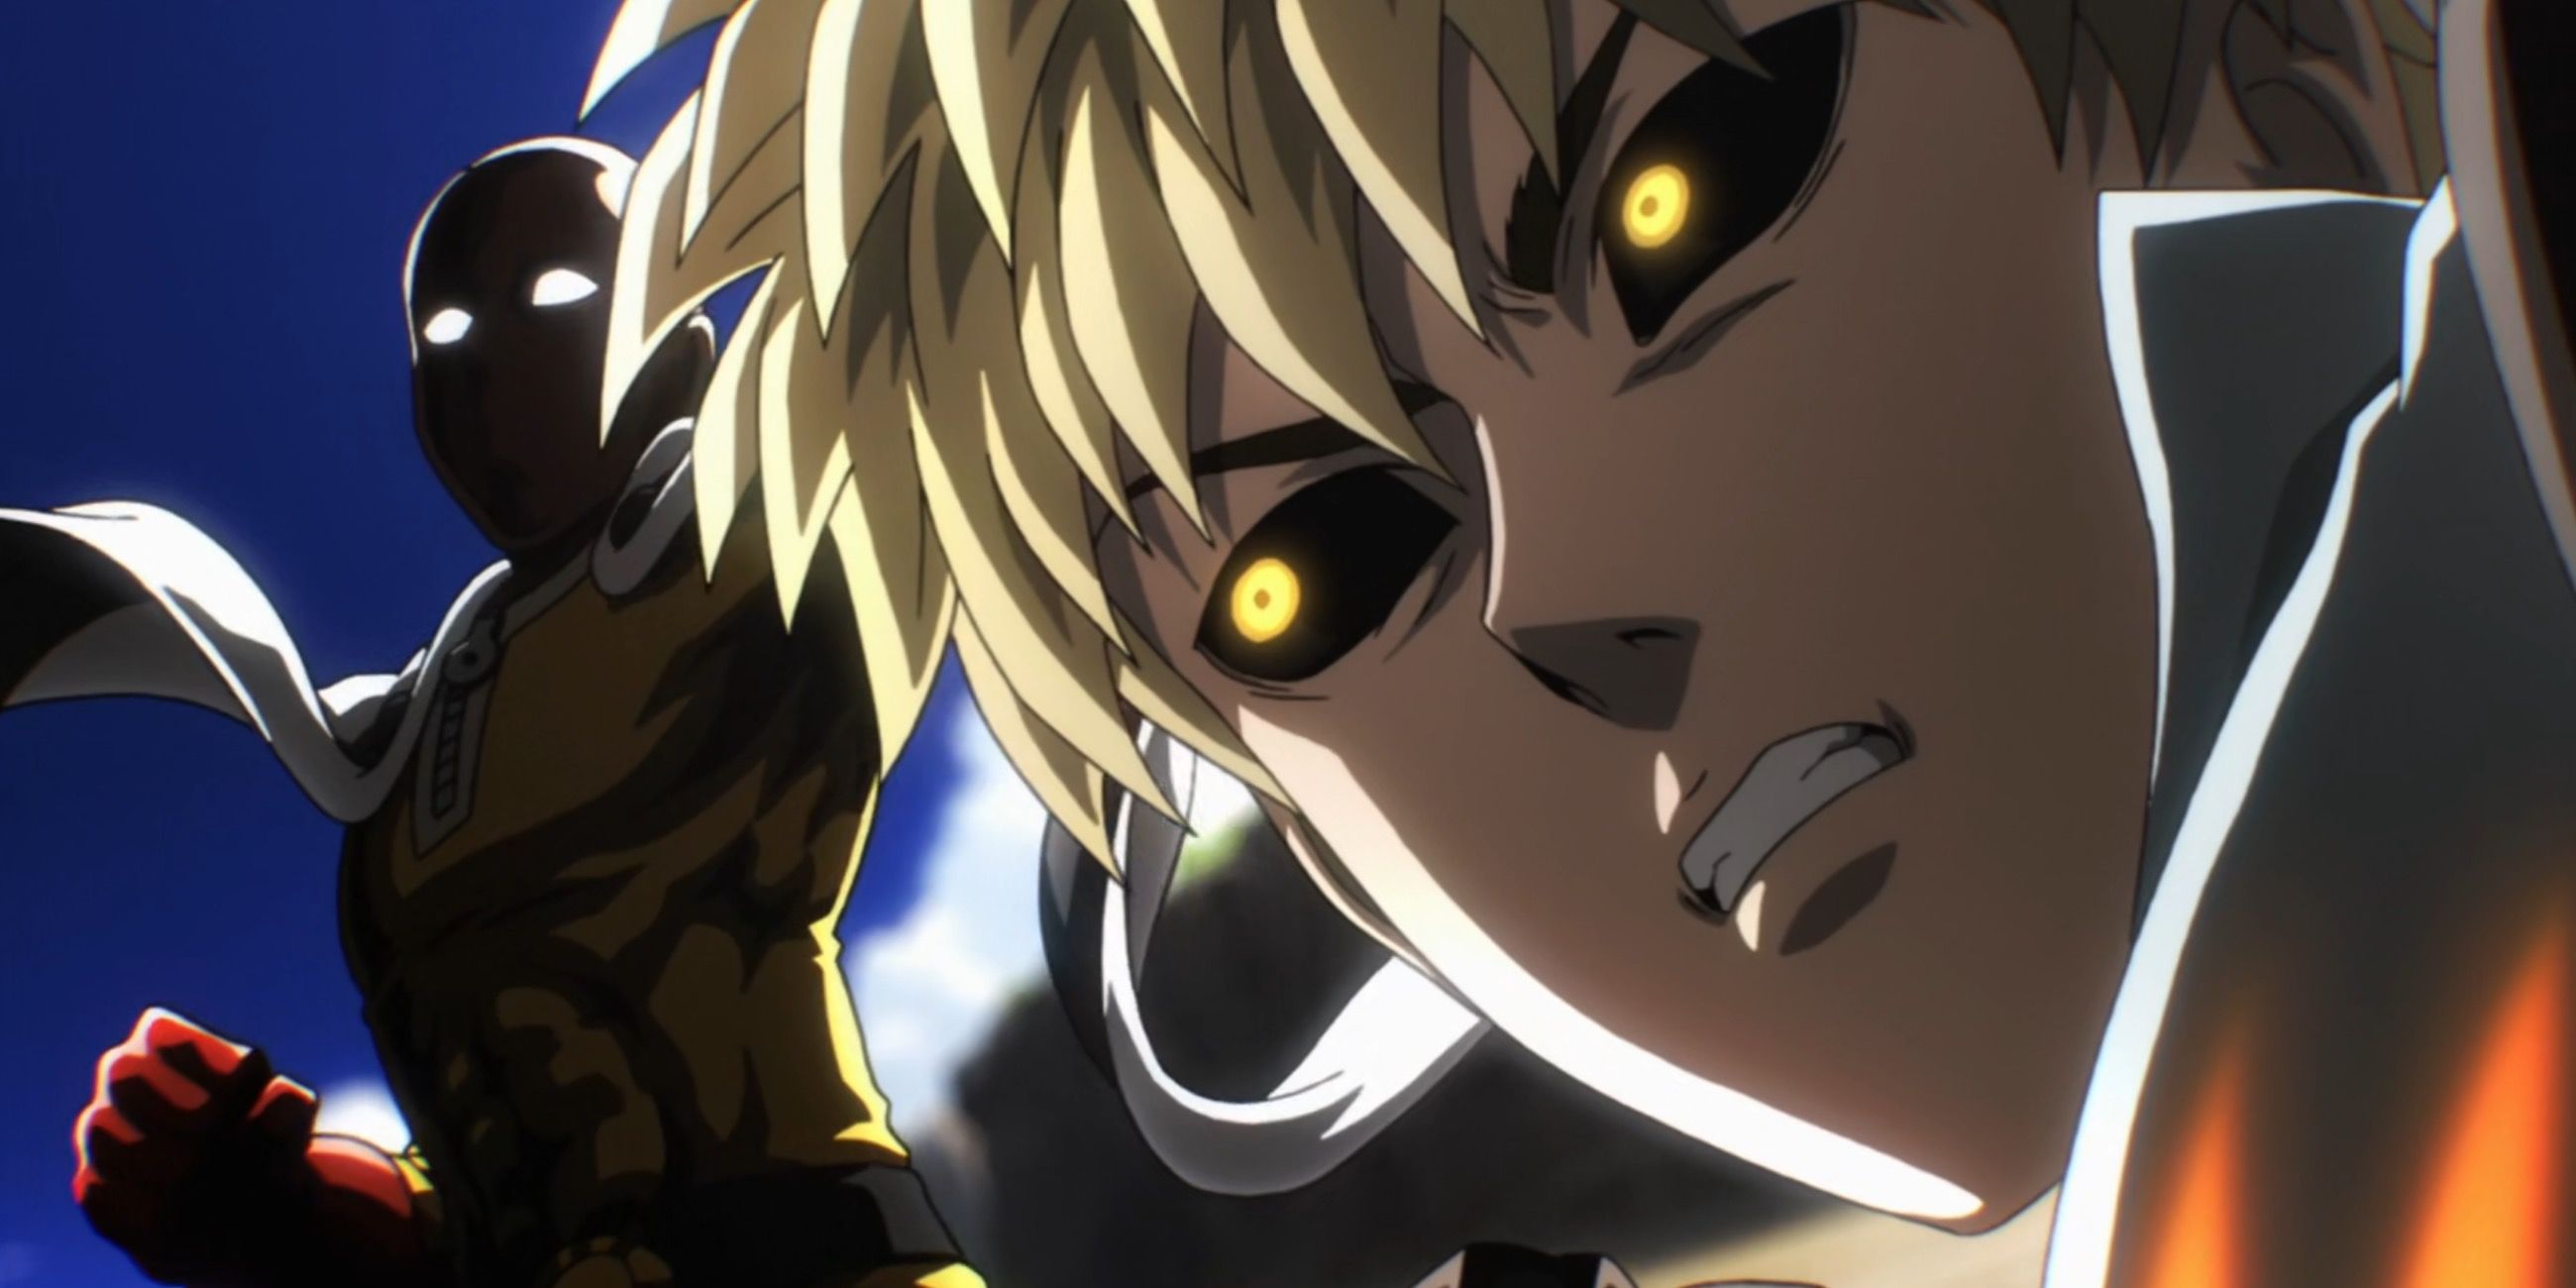 OnePunch Man 10 Things You Didnt Know About Saitama & Genos Relationship